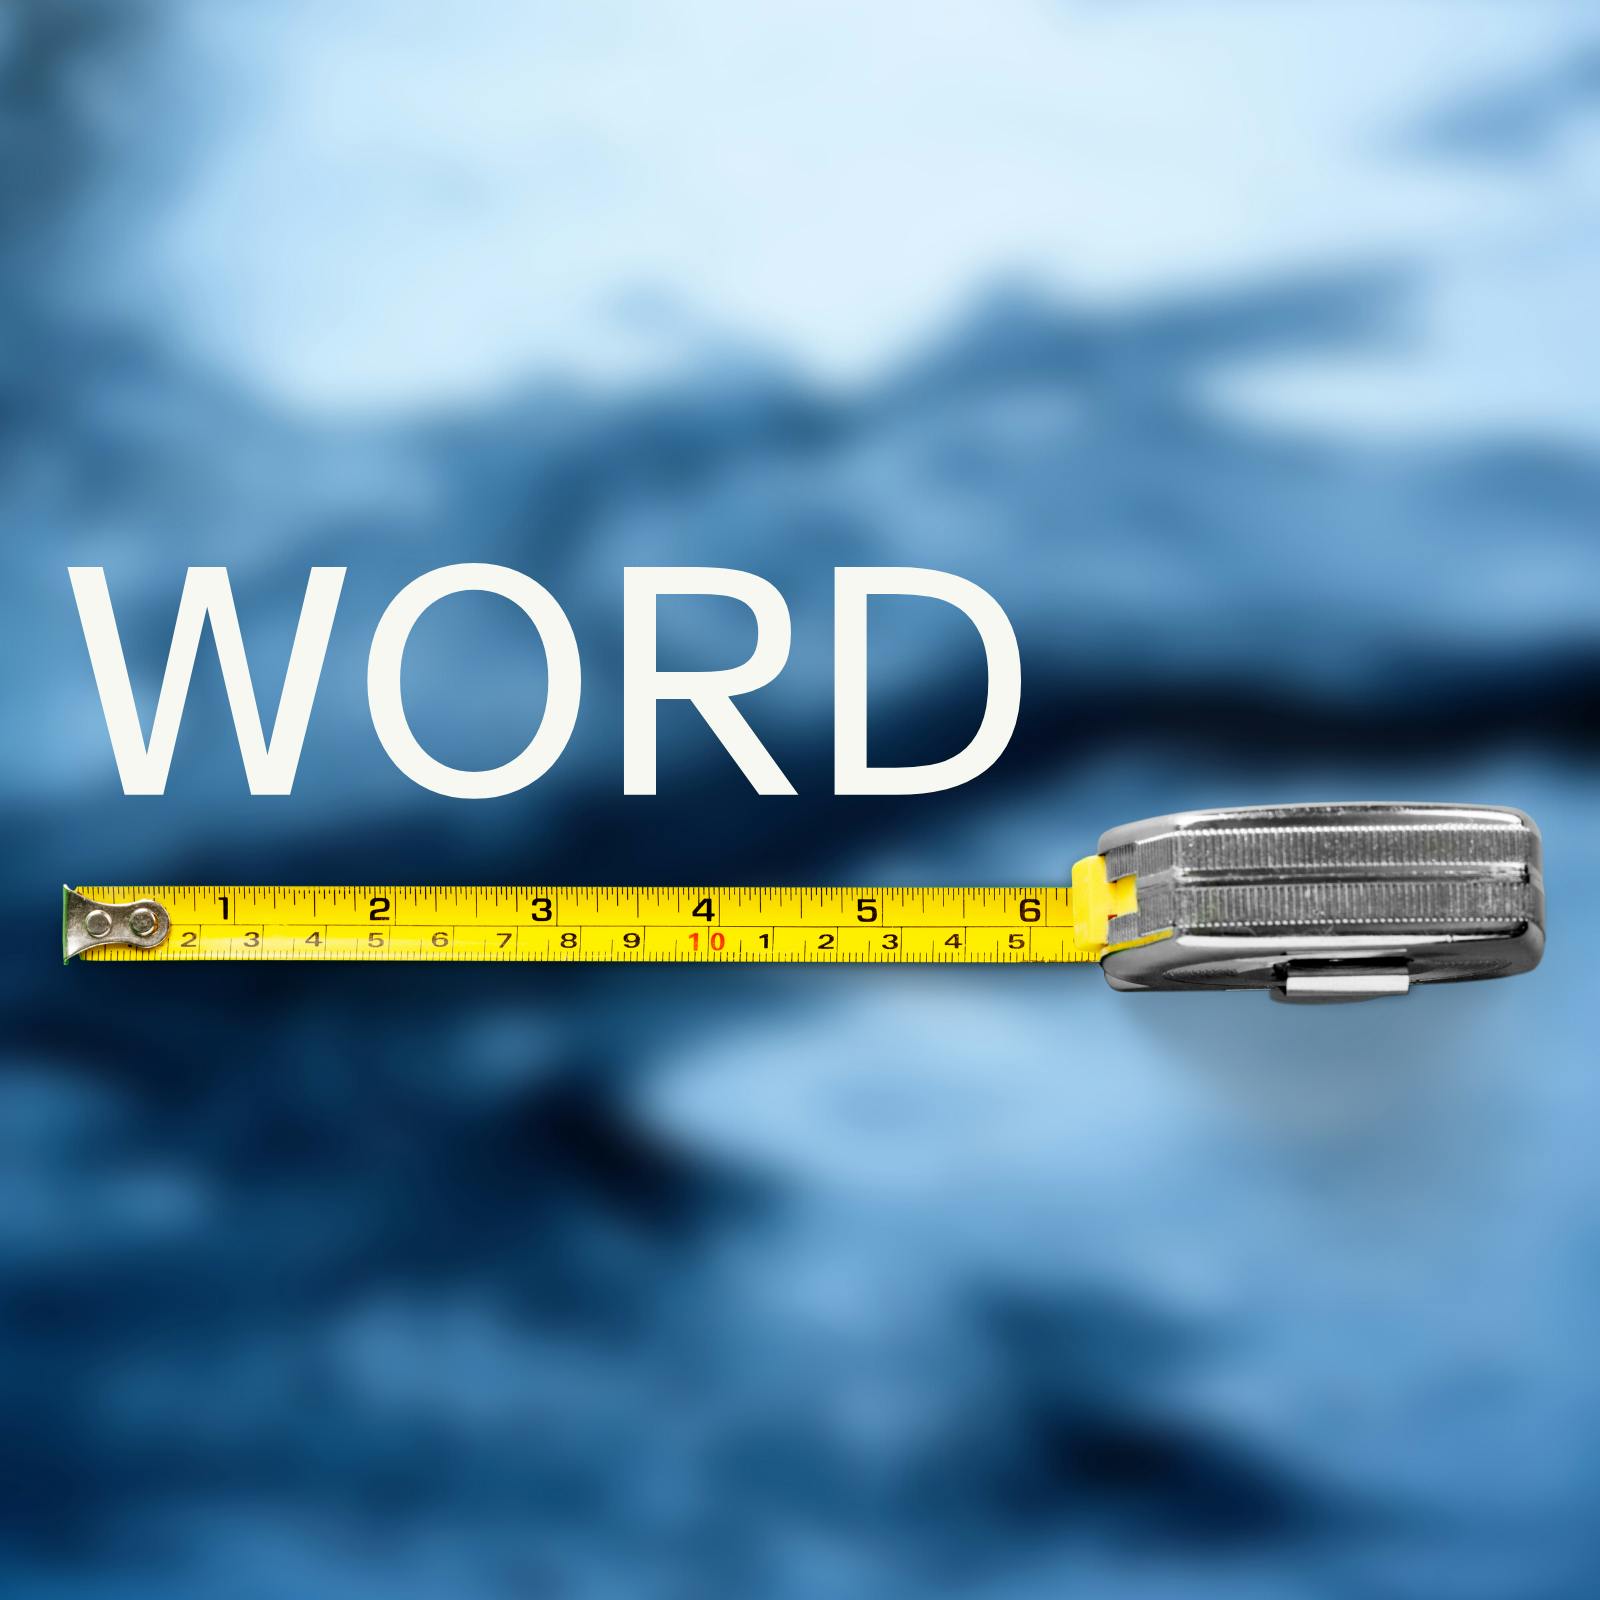 A measuring tape measuring the length of the word "WORD"